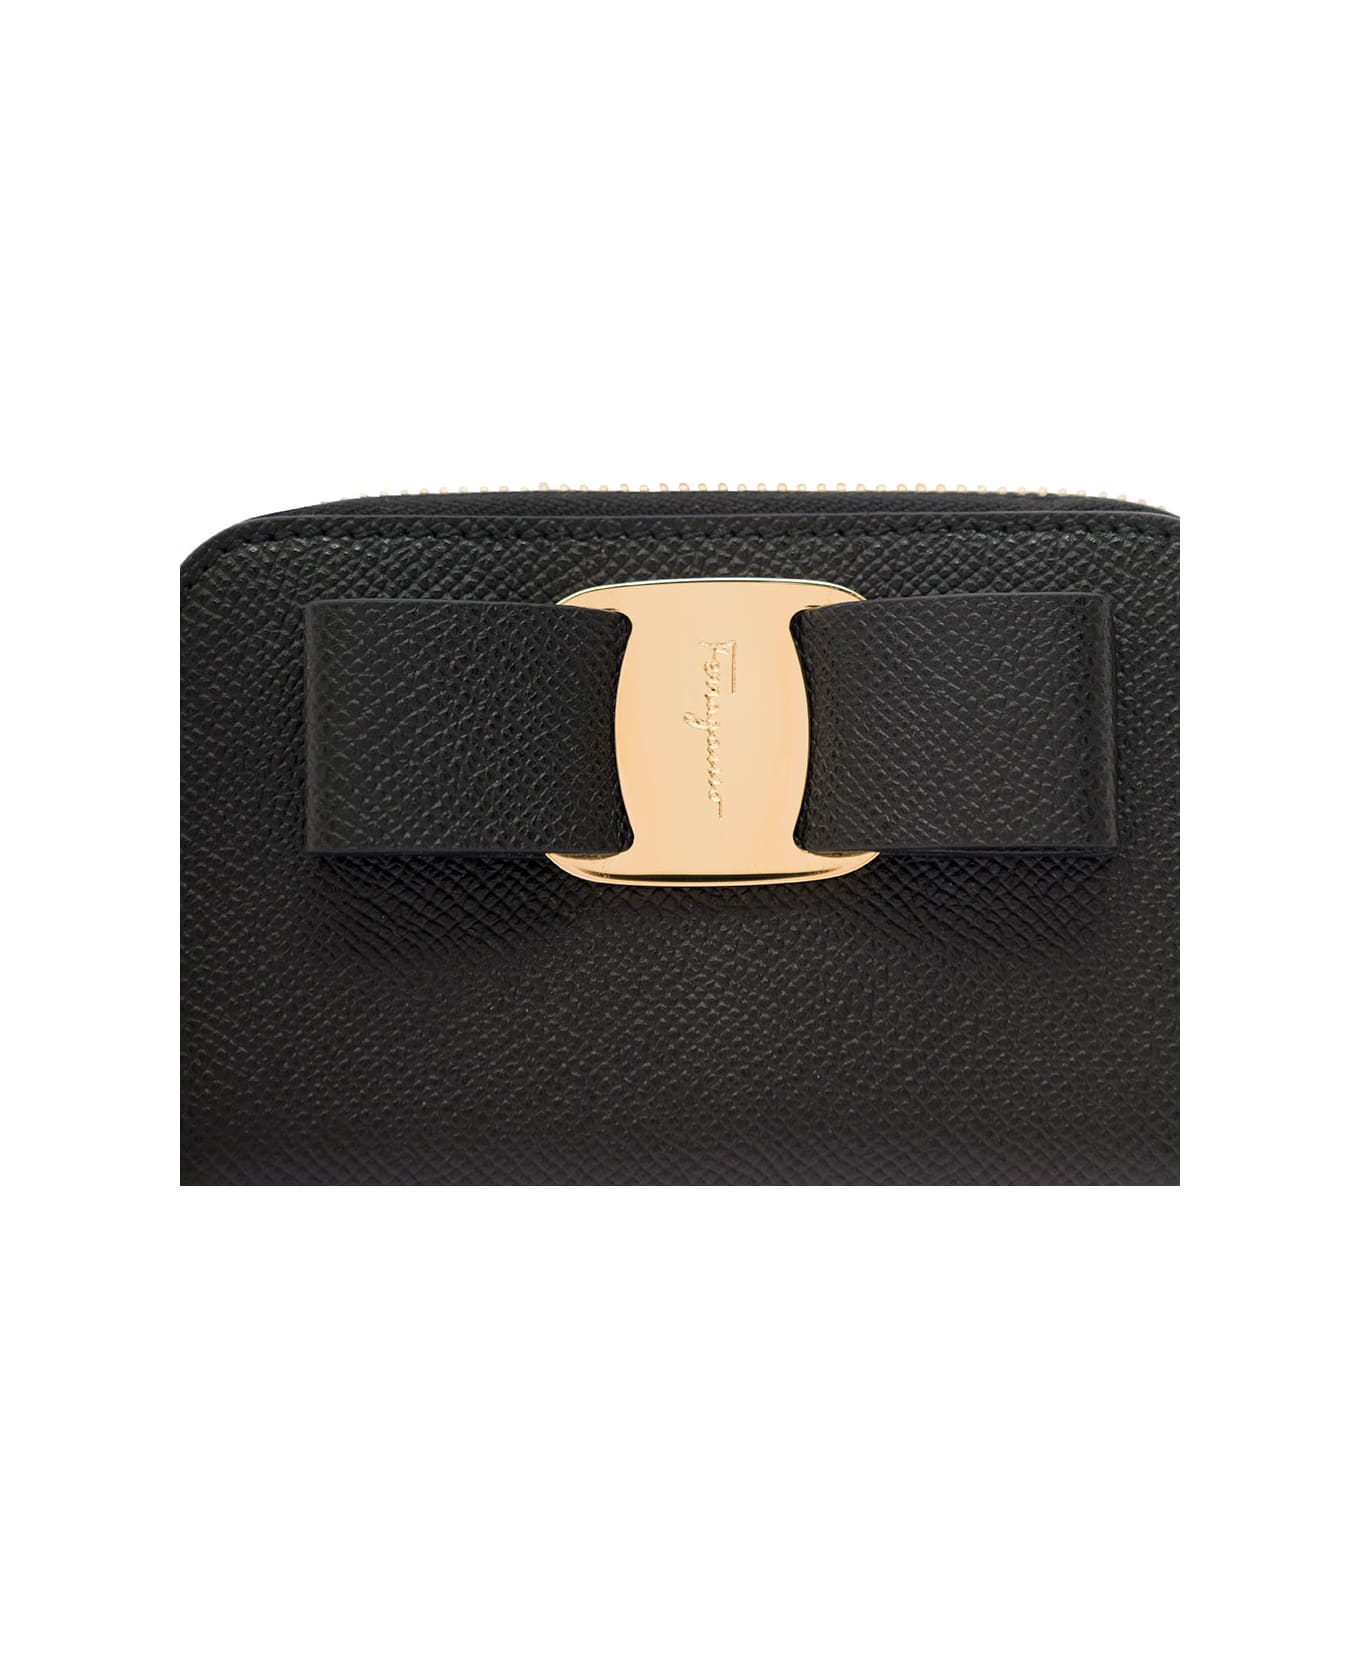 Ferragamo 'vara' Black Card-holder With Bow And Logo Detail In Hammered Leather Woman - Black アクセサリー